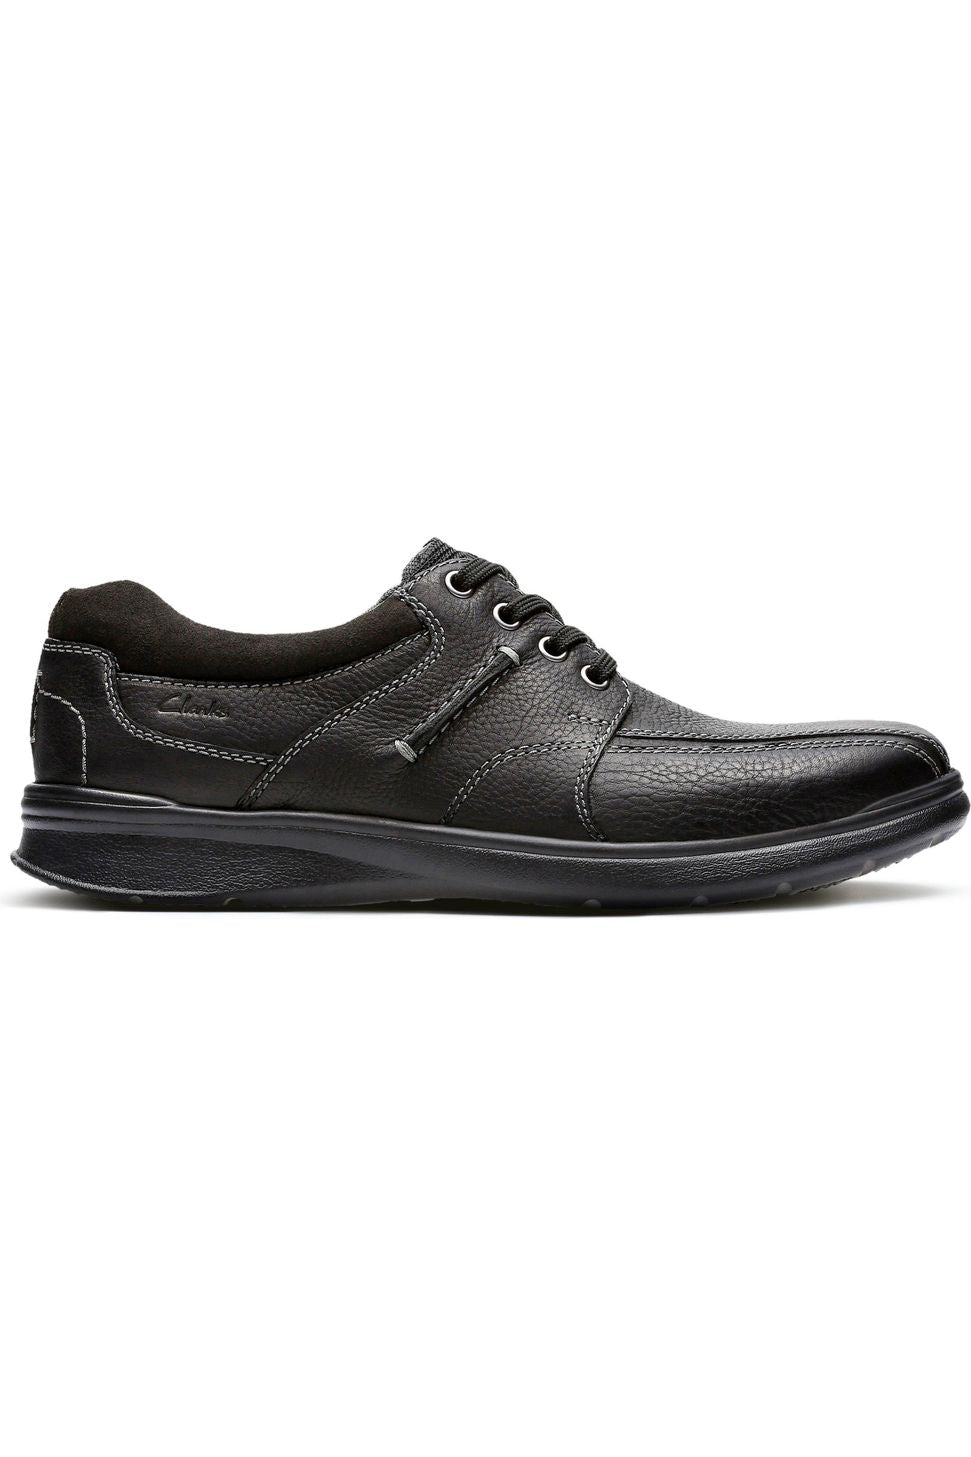 Clarks Cotrell Walk in black oily leather